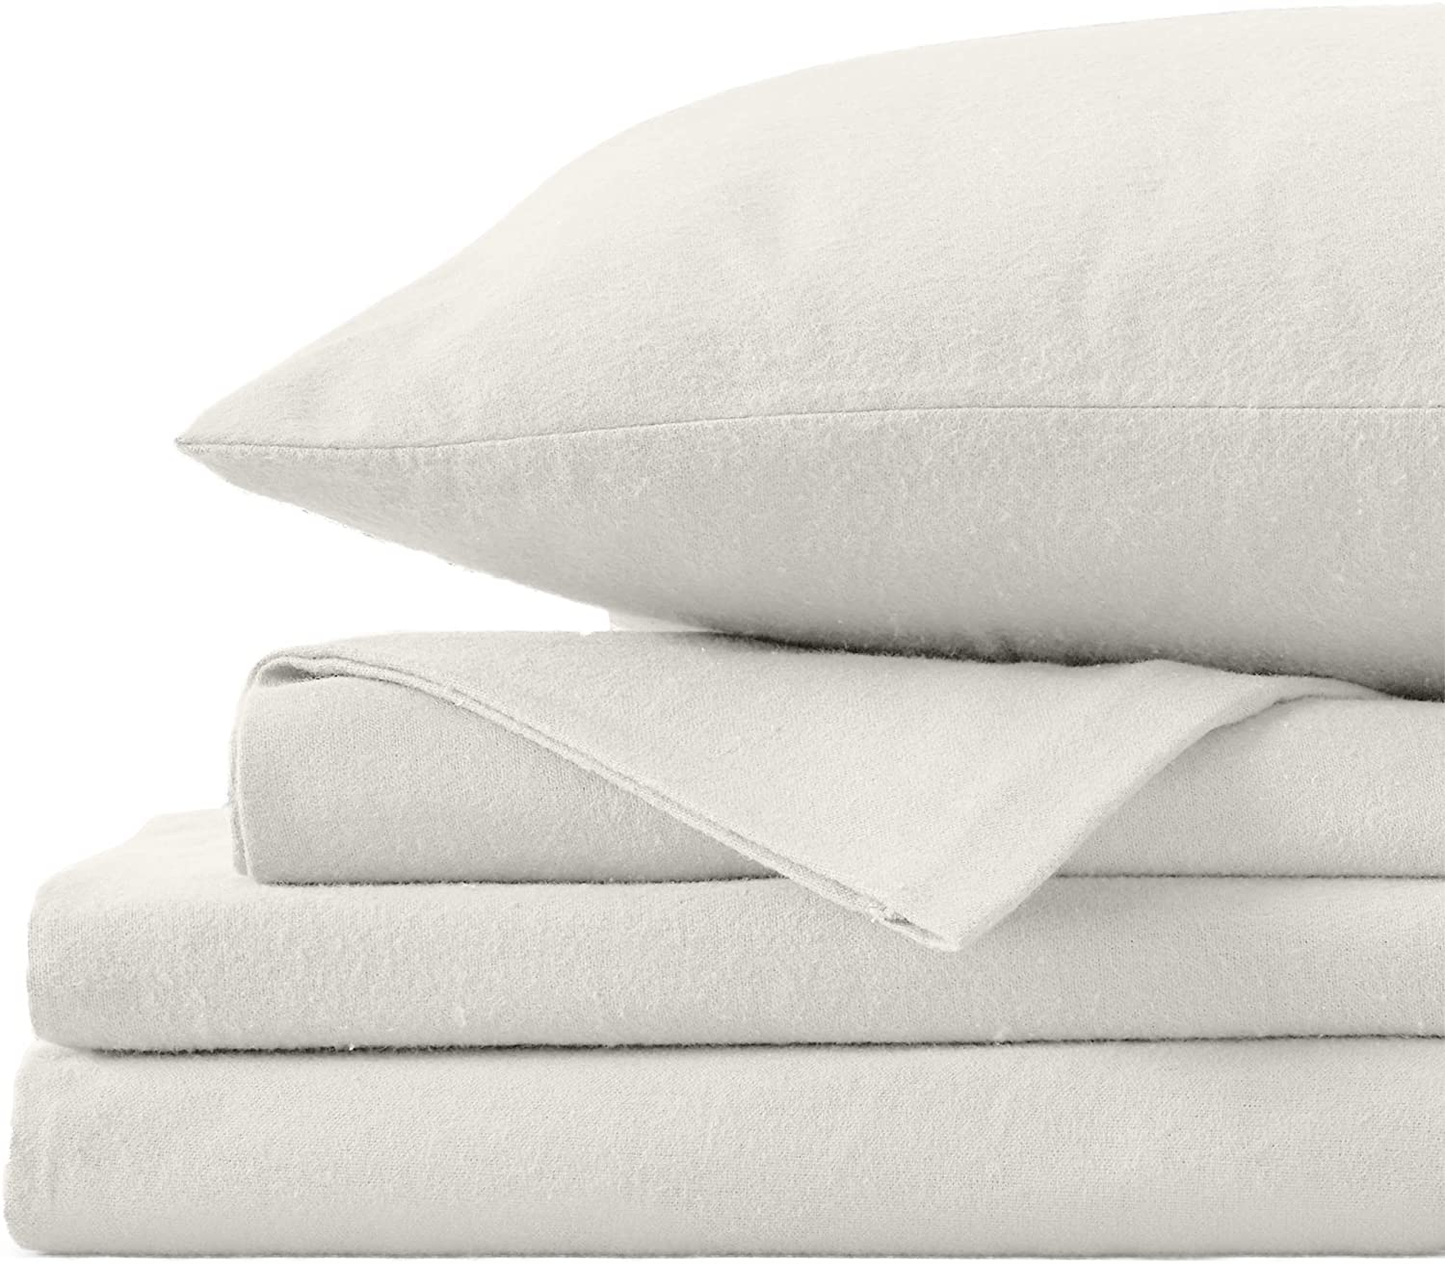 Luxury Home Extra Soft 100% Turkish Cotton Flannel Sheet Set - Deep Pocket Bed Sheets